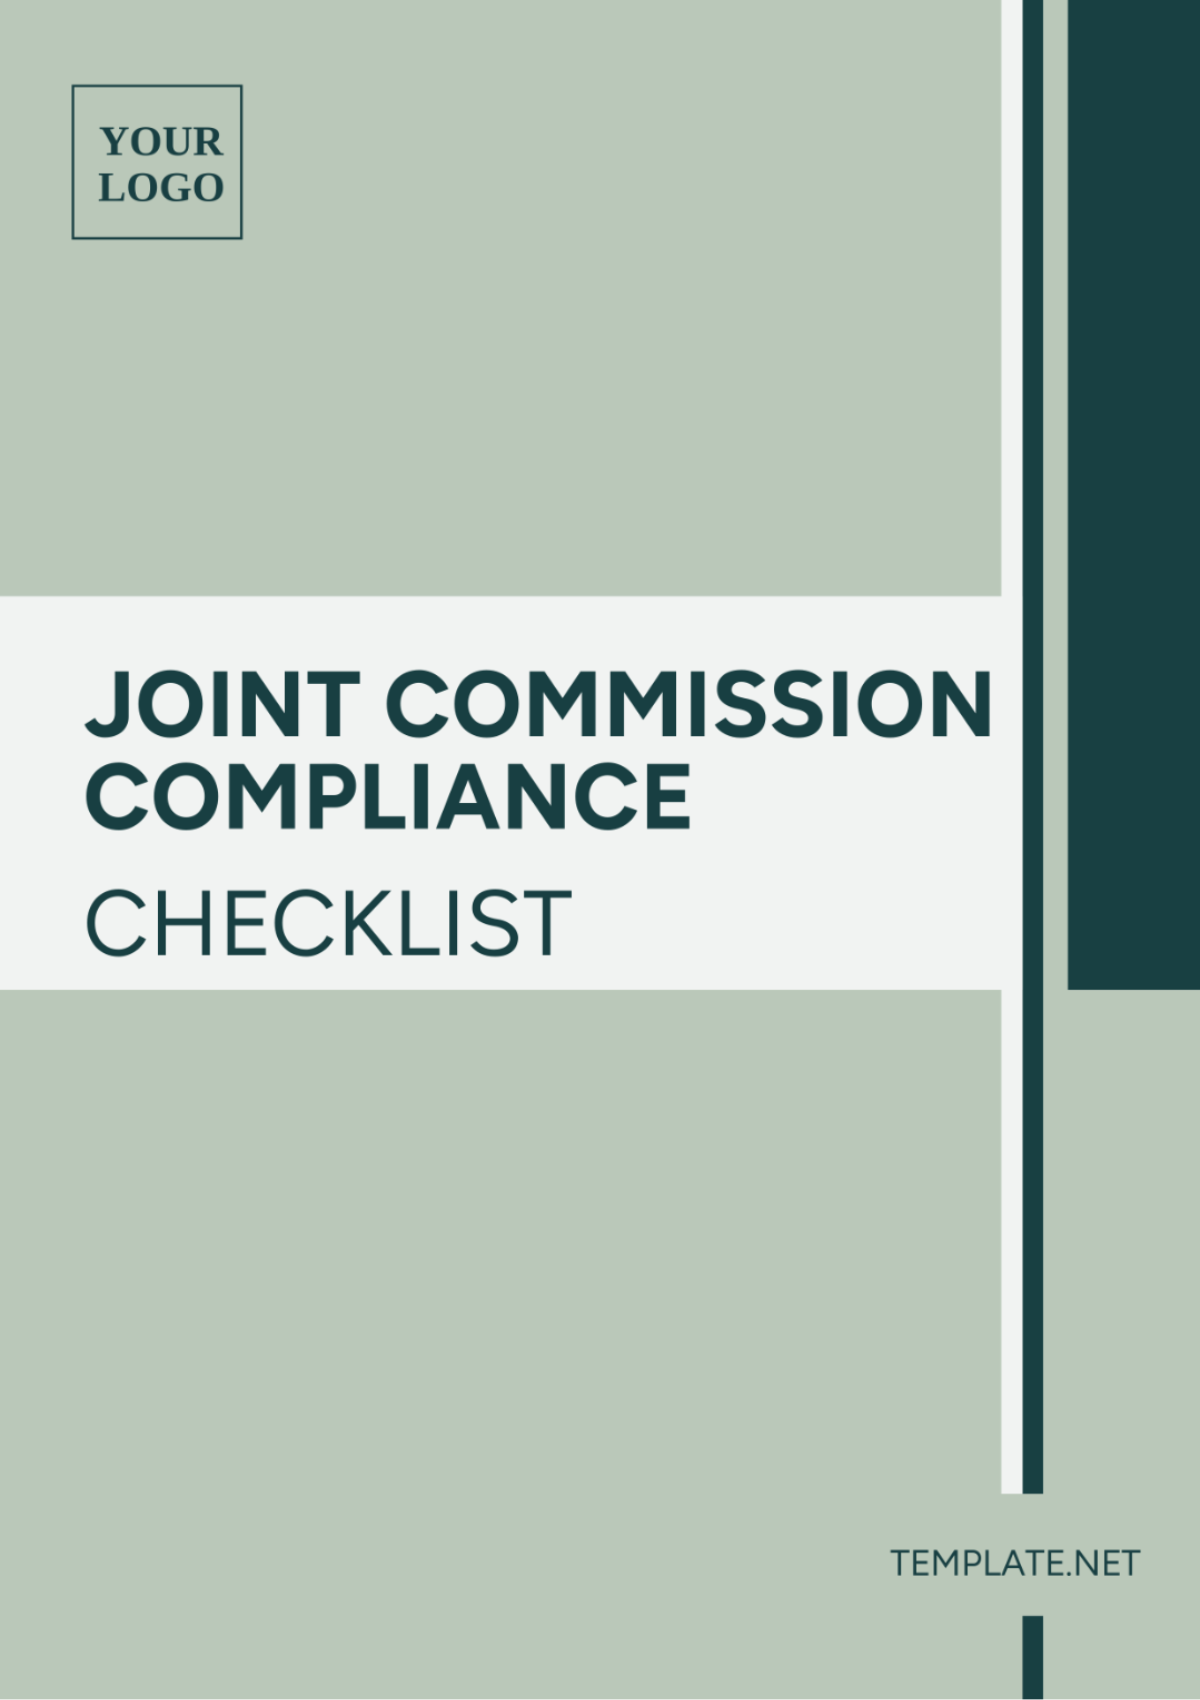 Joint Commission Compliance Checklist Template